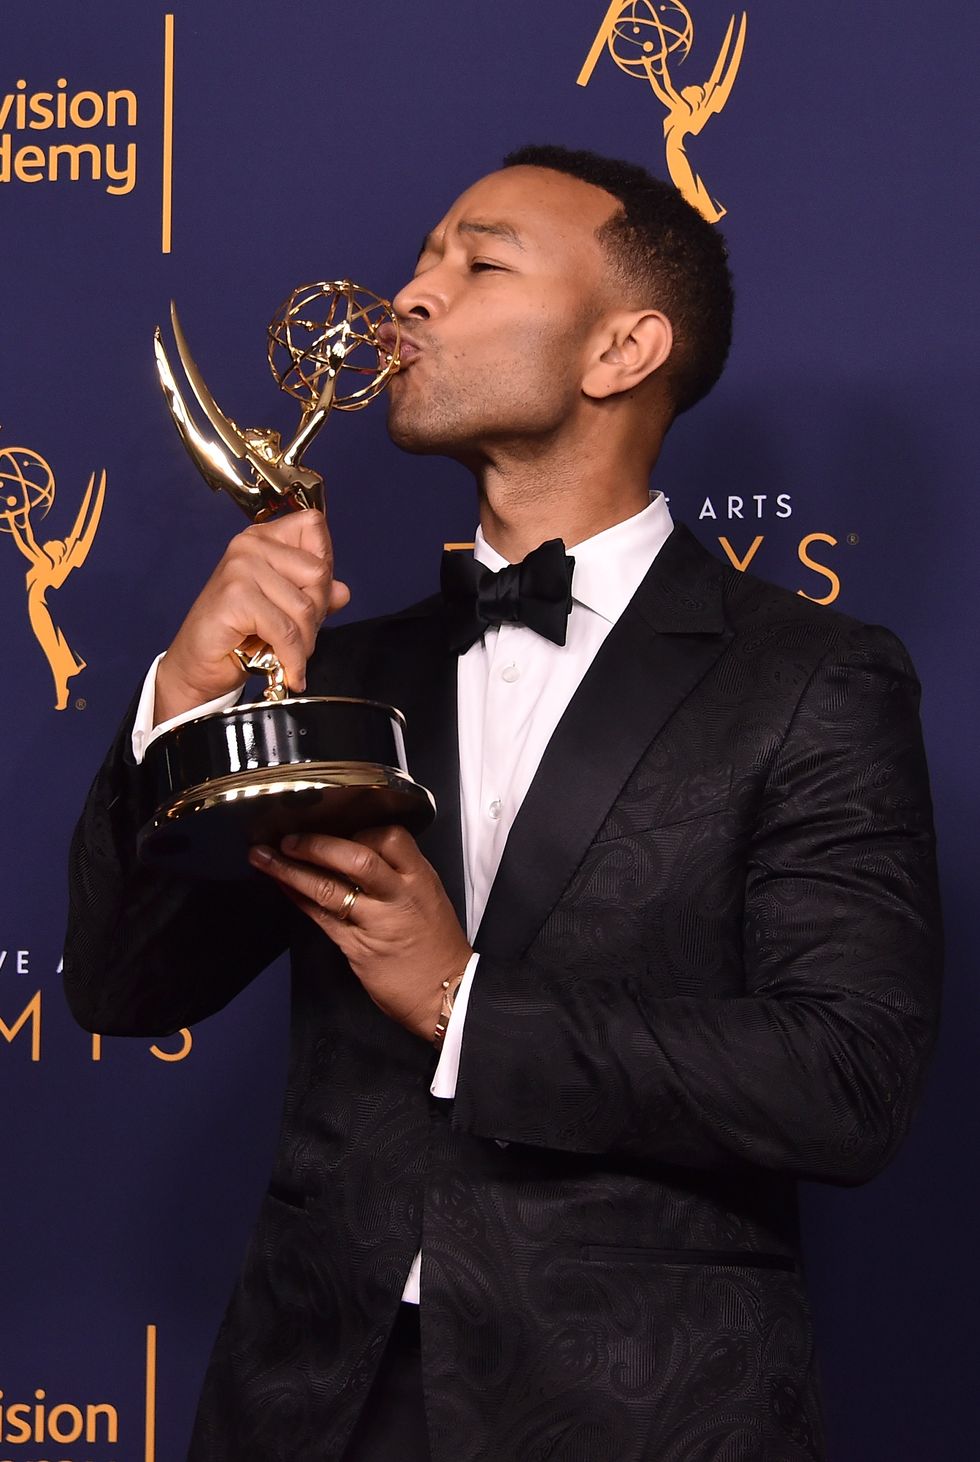 john legend, who is wearing a dark tuxedo, kisses his emmy at microsoft theater in los angeles, california